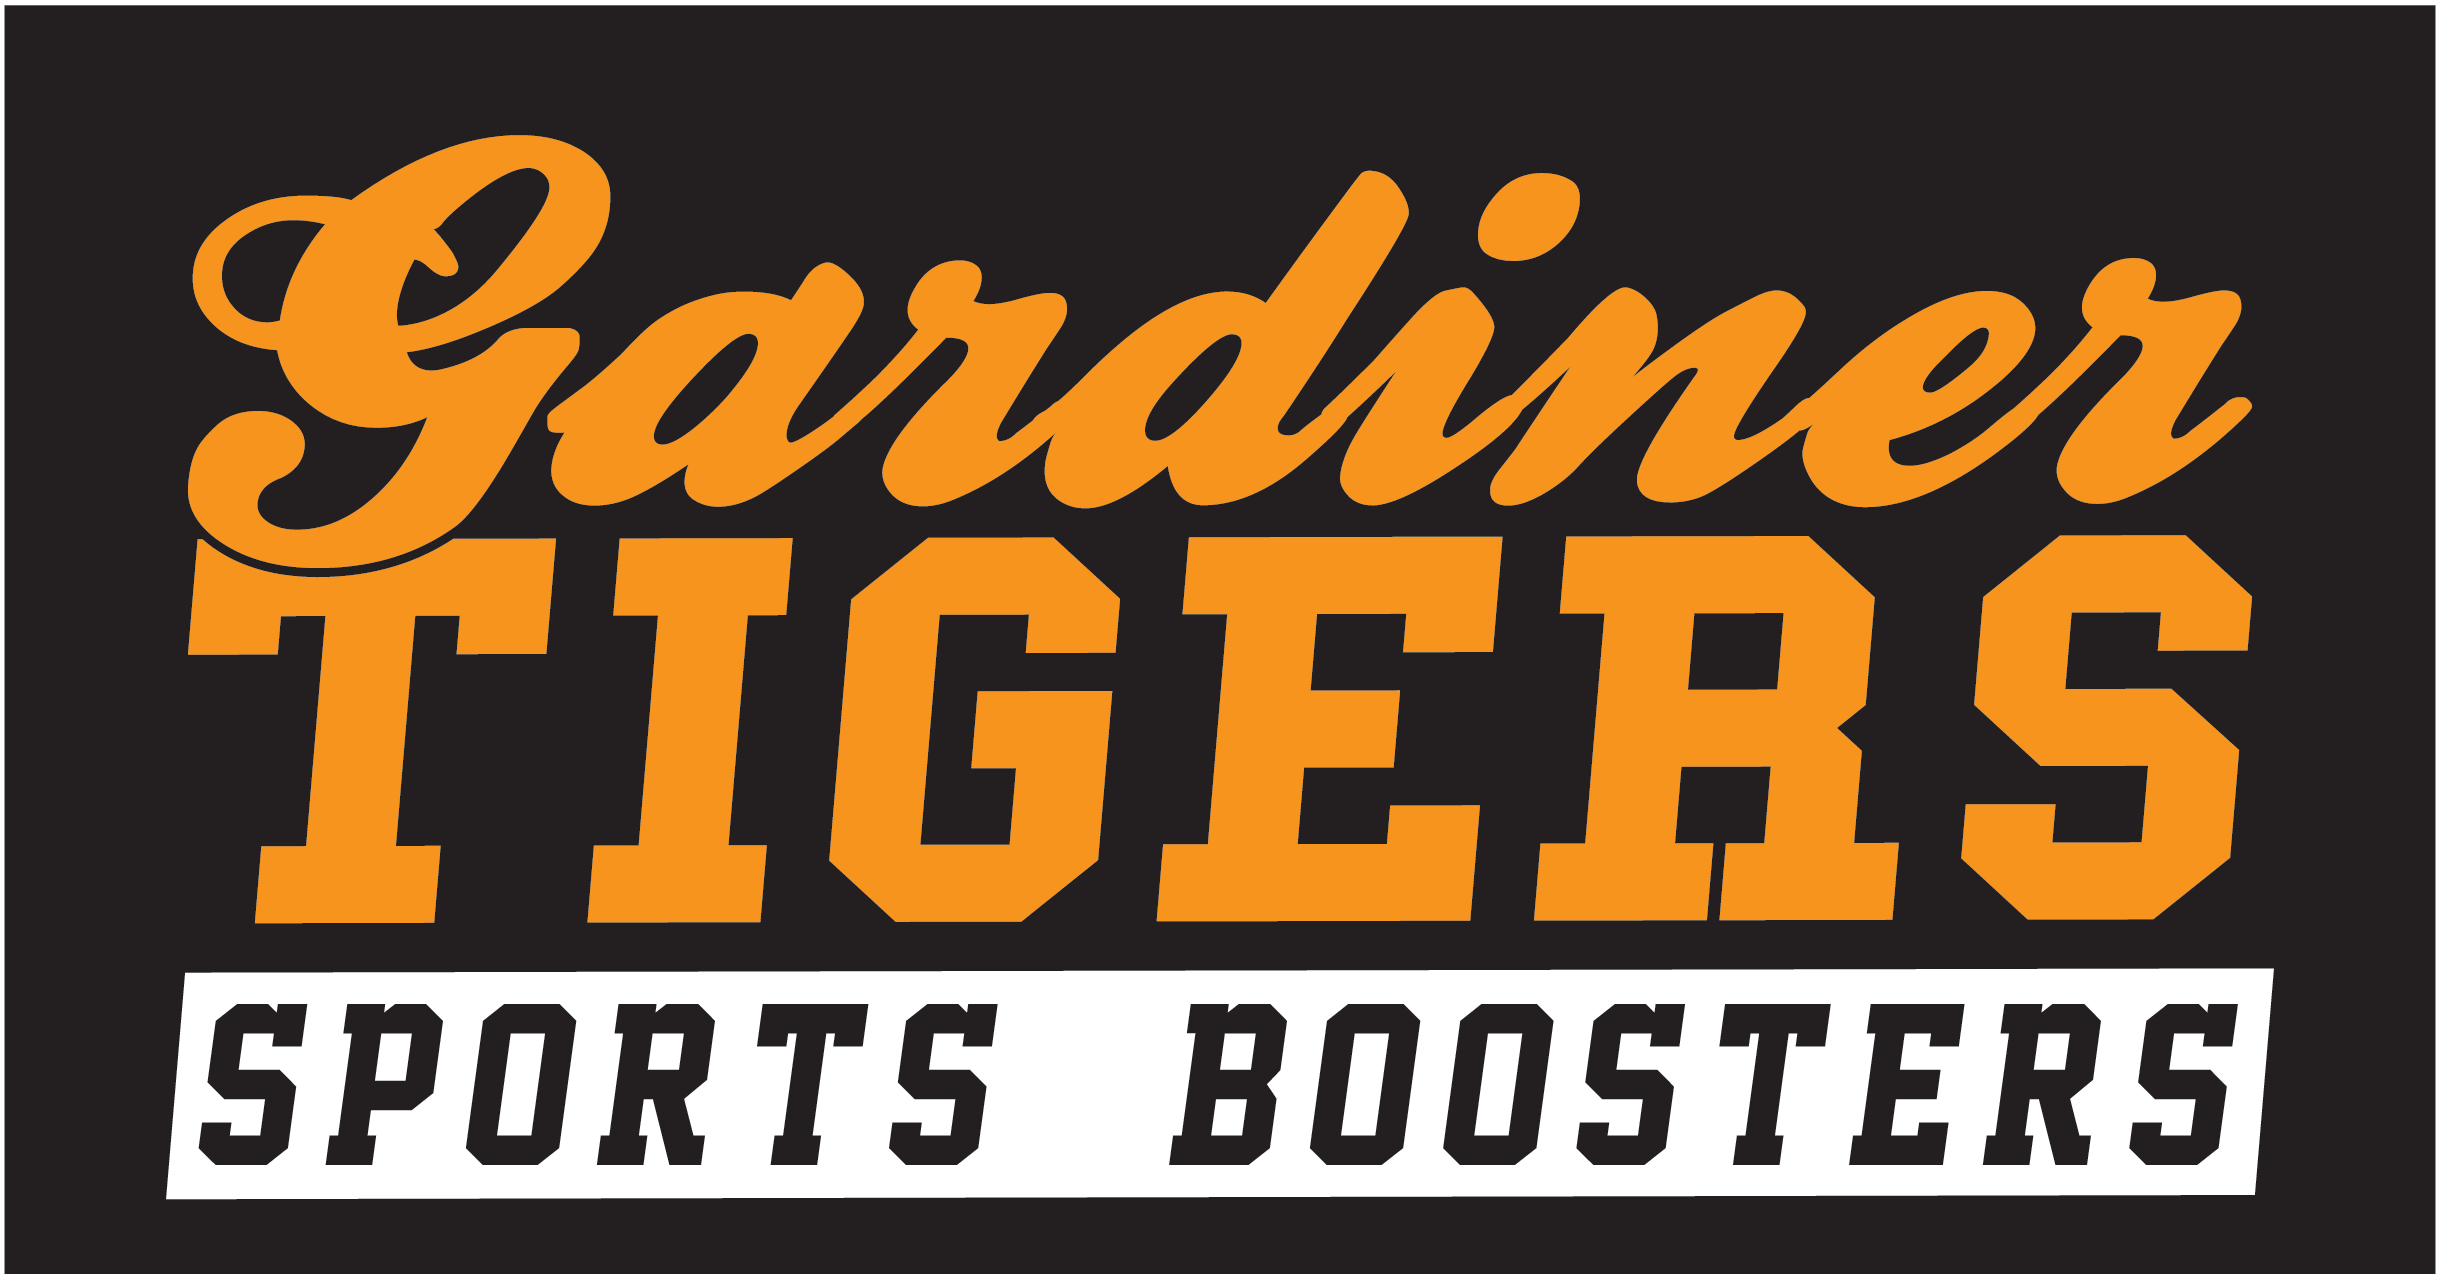 Gardiner Tigers Sports Boosters 2017 2